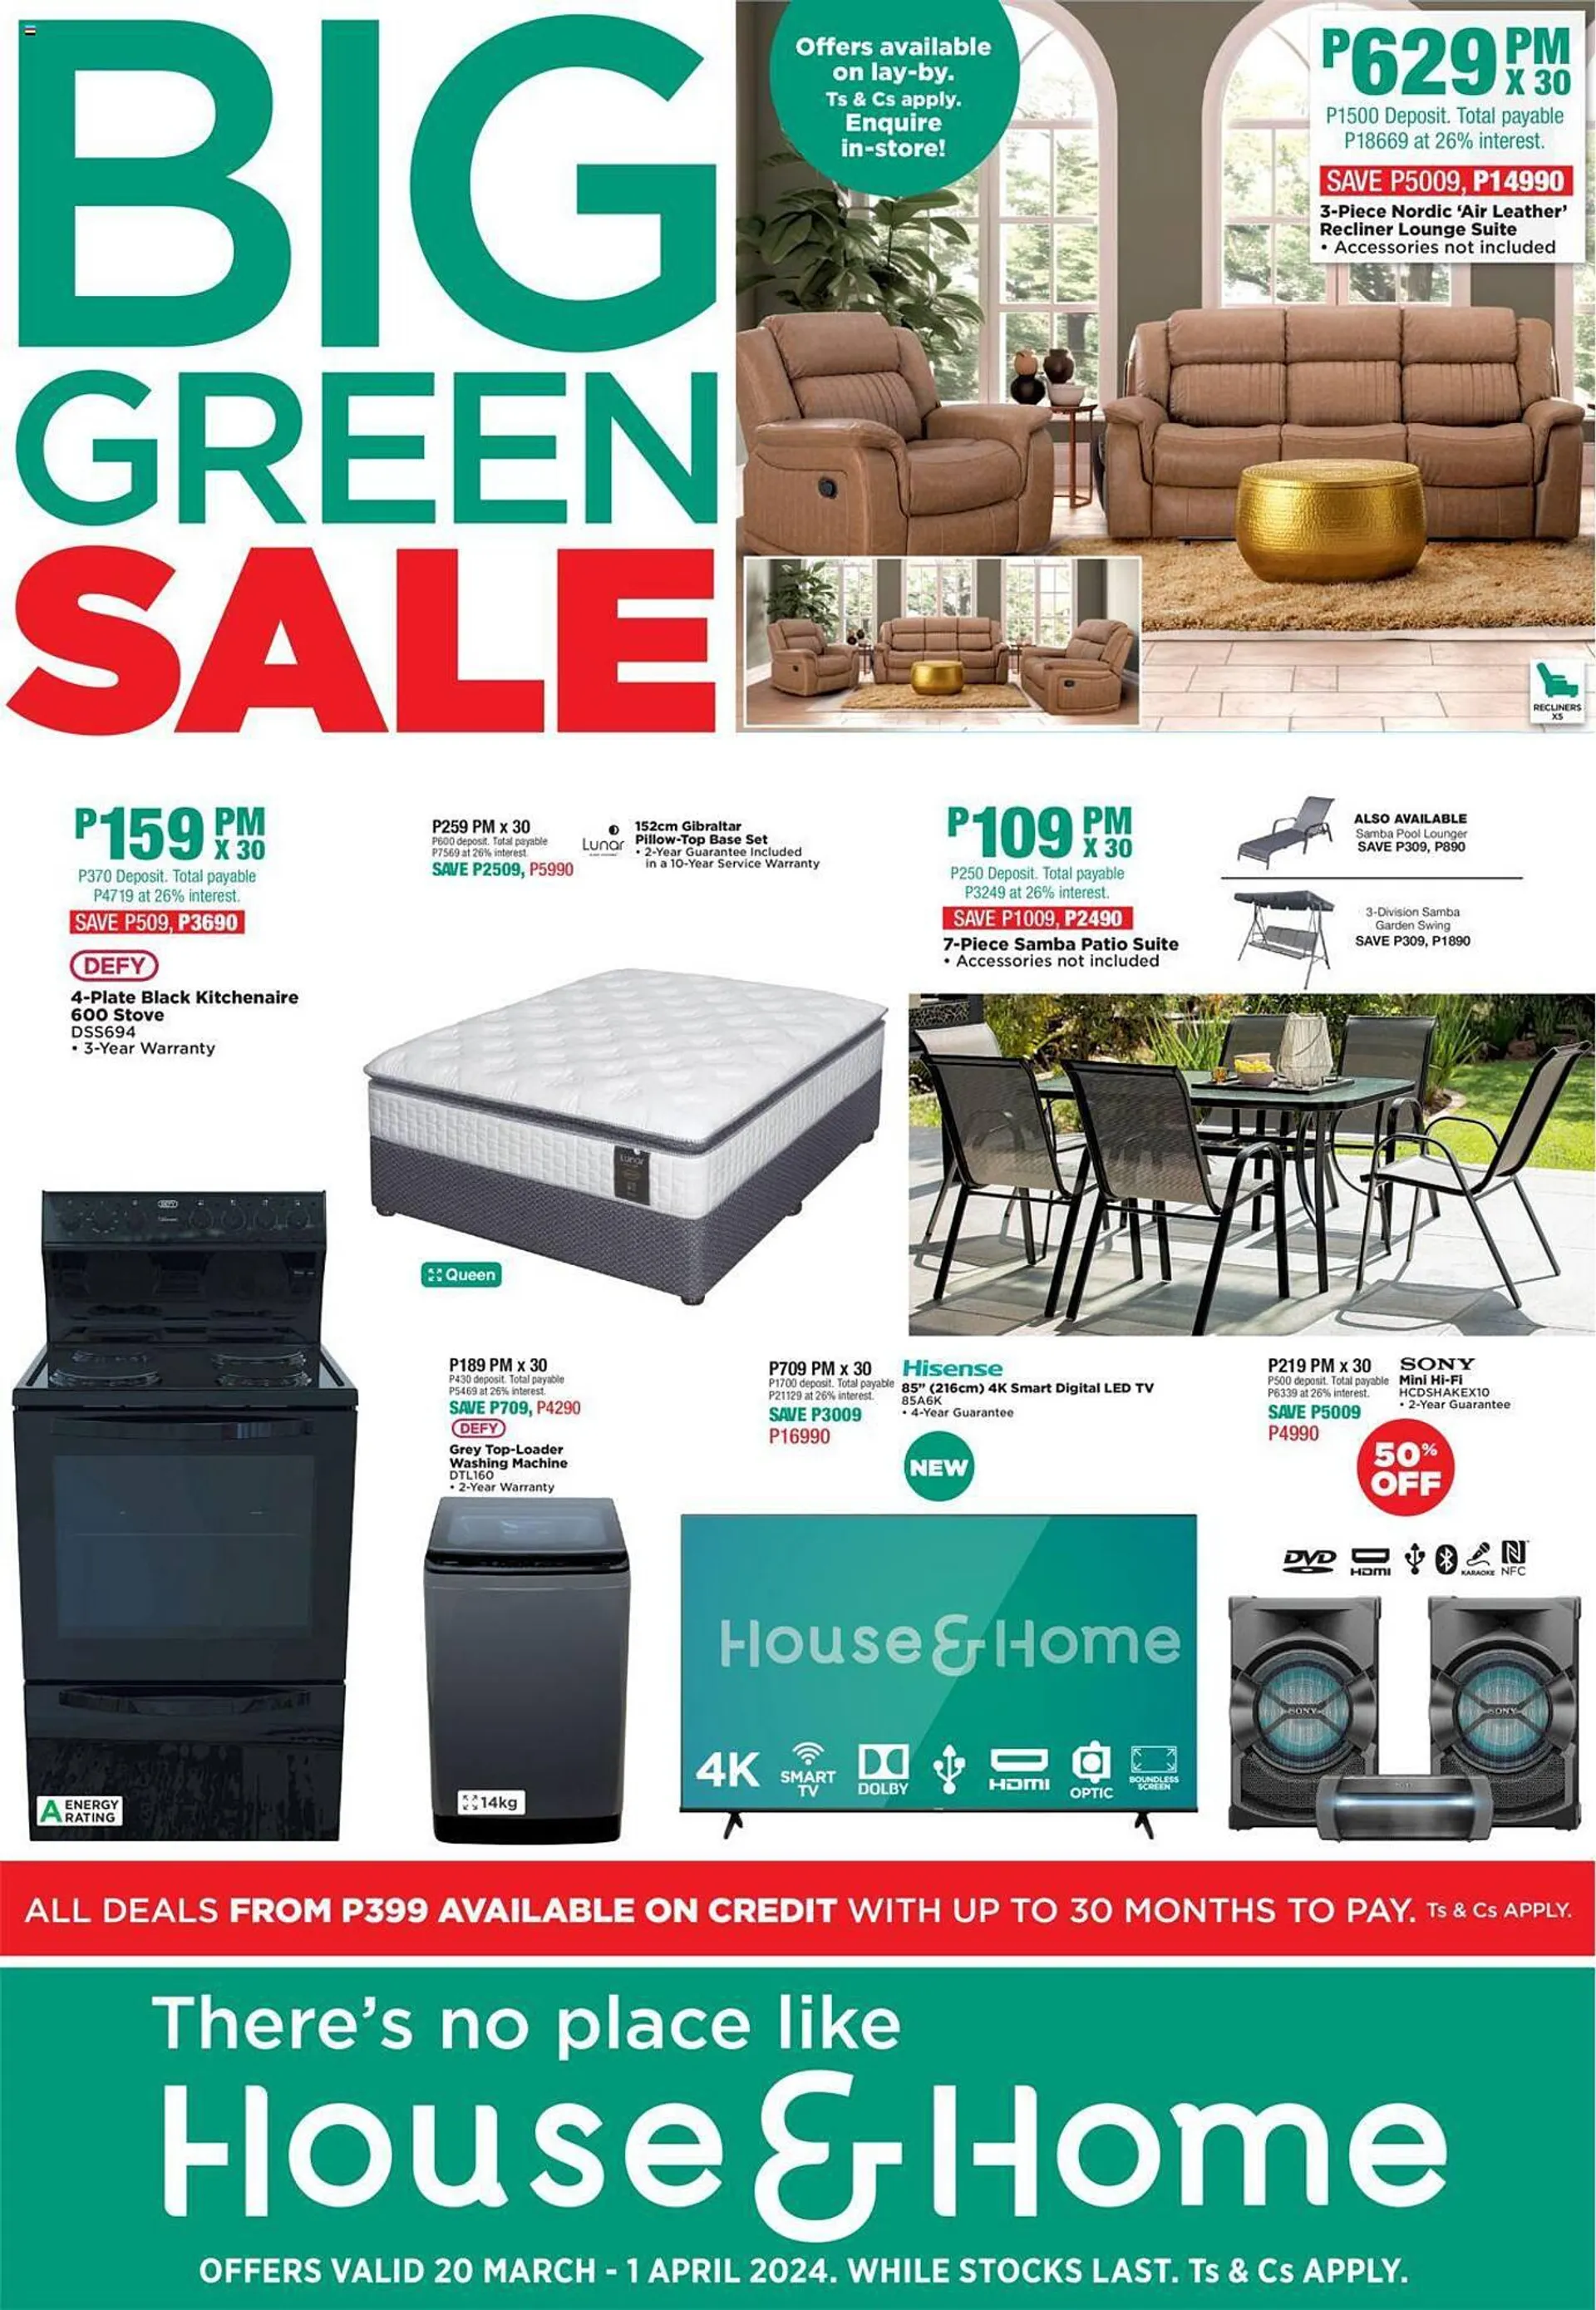 House & Home catalogue - 20 March 1 April 2024 - Page 1